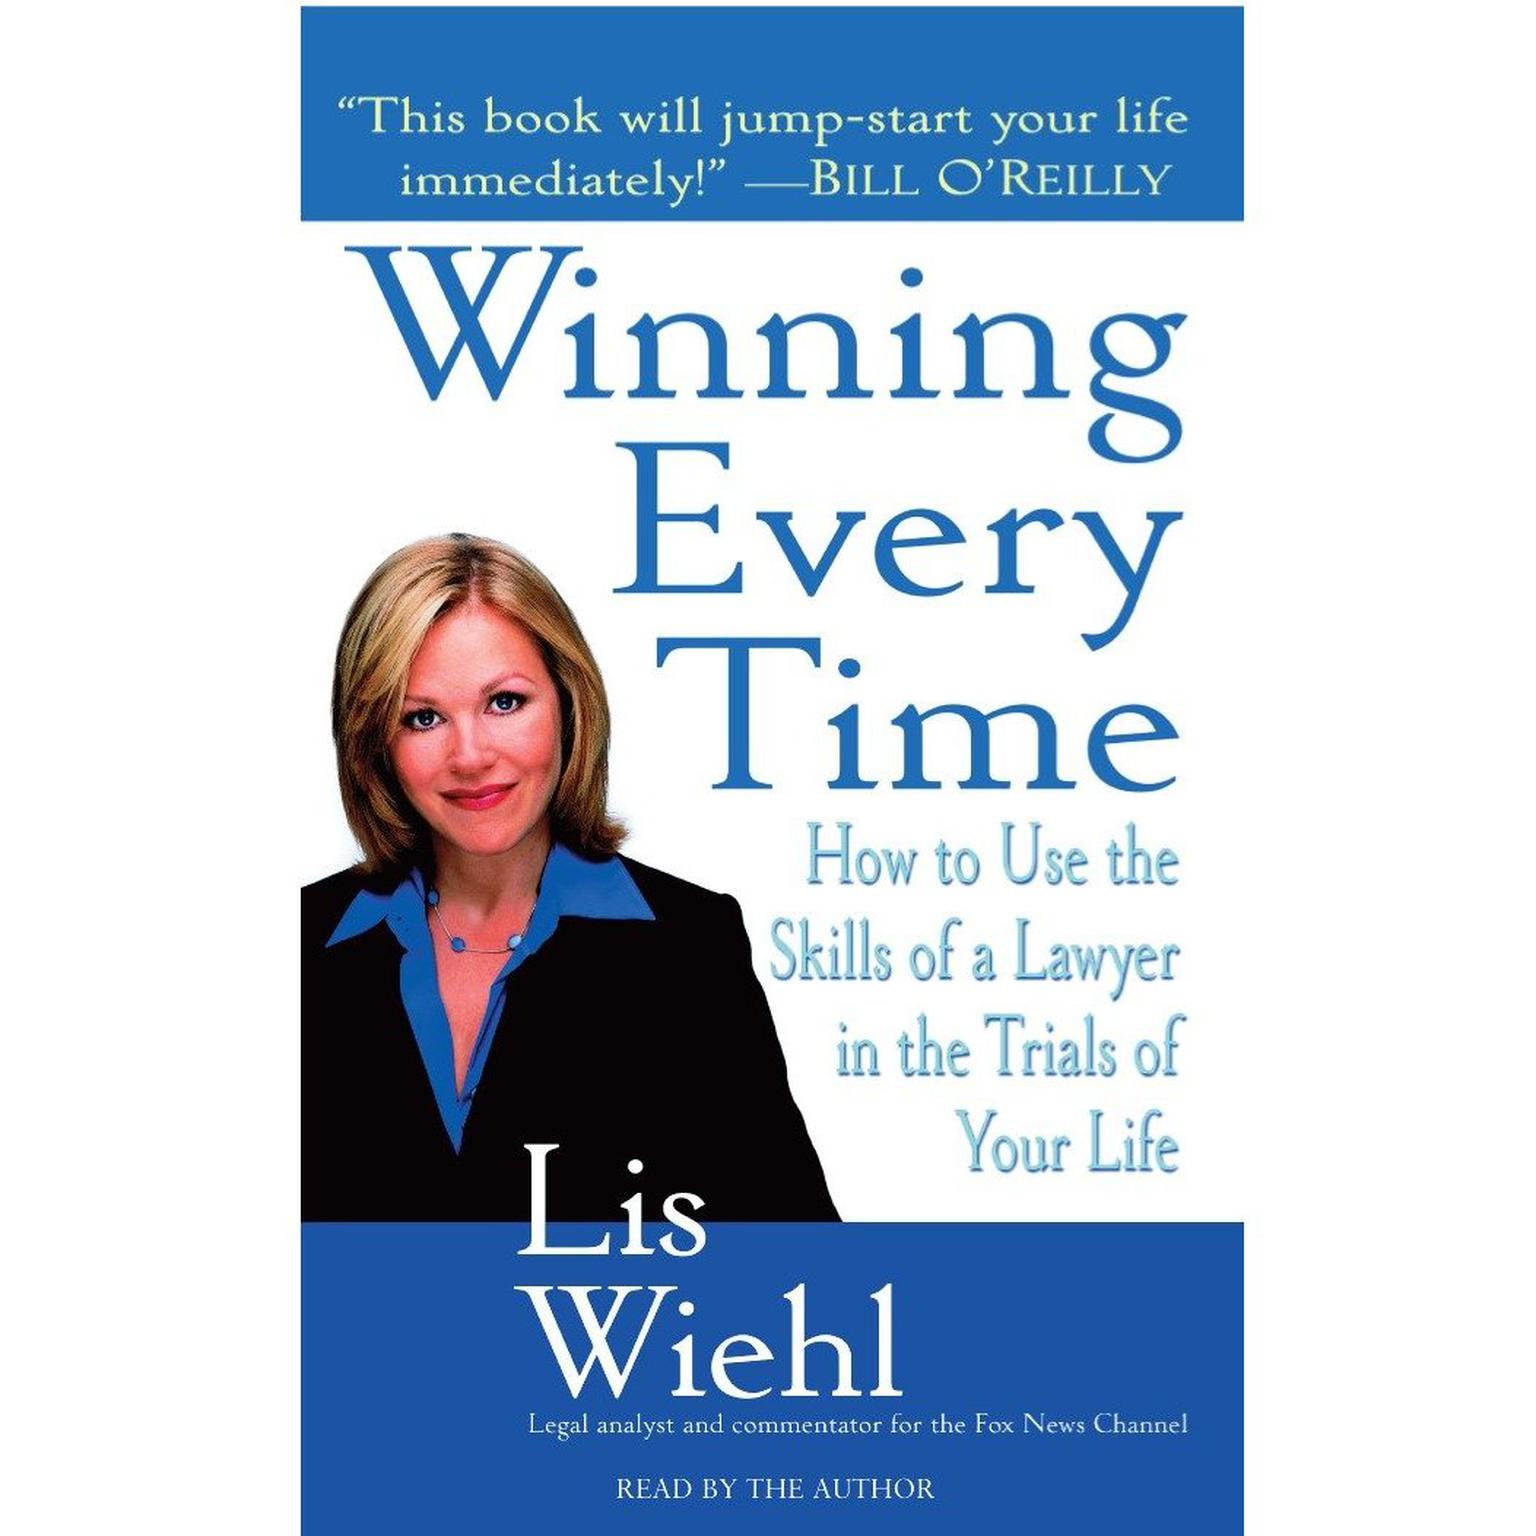 Winning Every Time (Abridged): How to Use the Skills of a Lawyer in the Trials of Your Life Audiobook, by Lis Wiehl